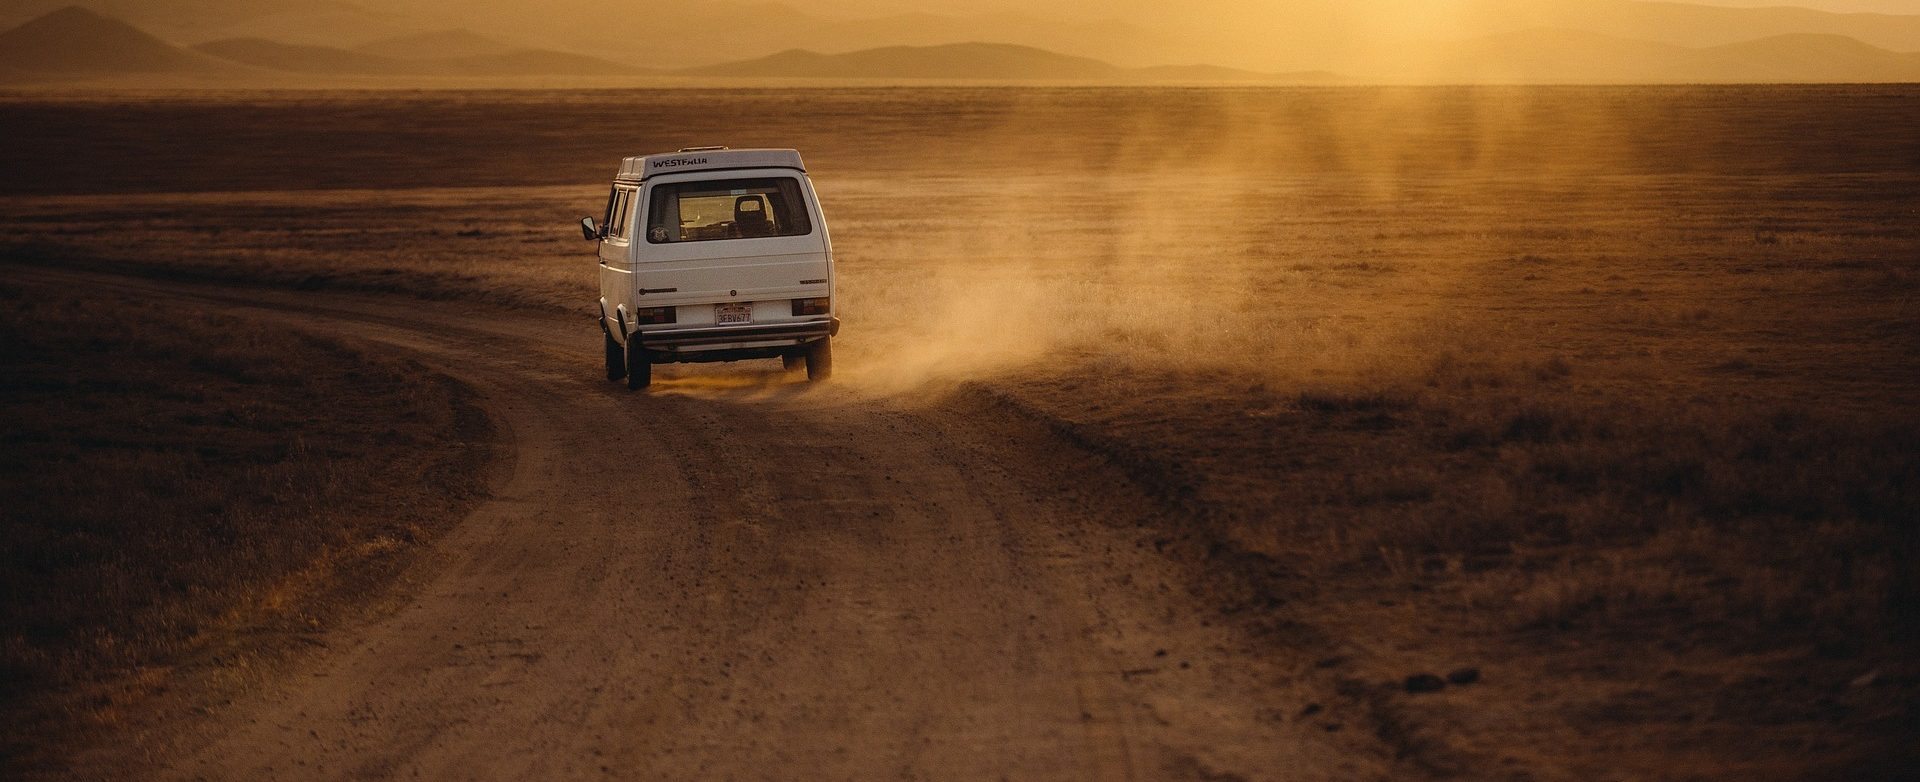 White color van crossing a lonely and desert road